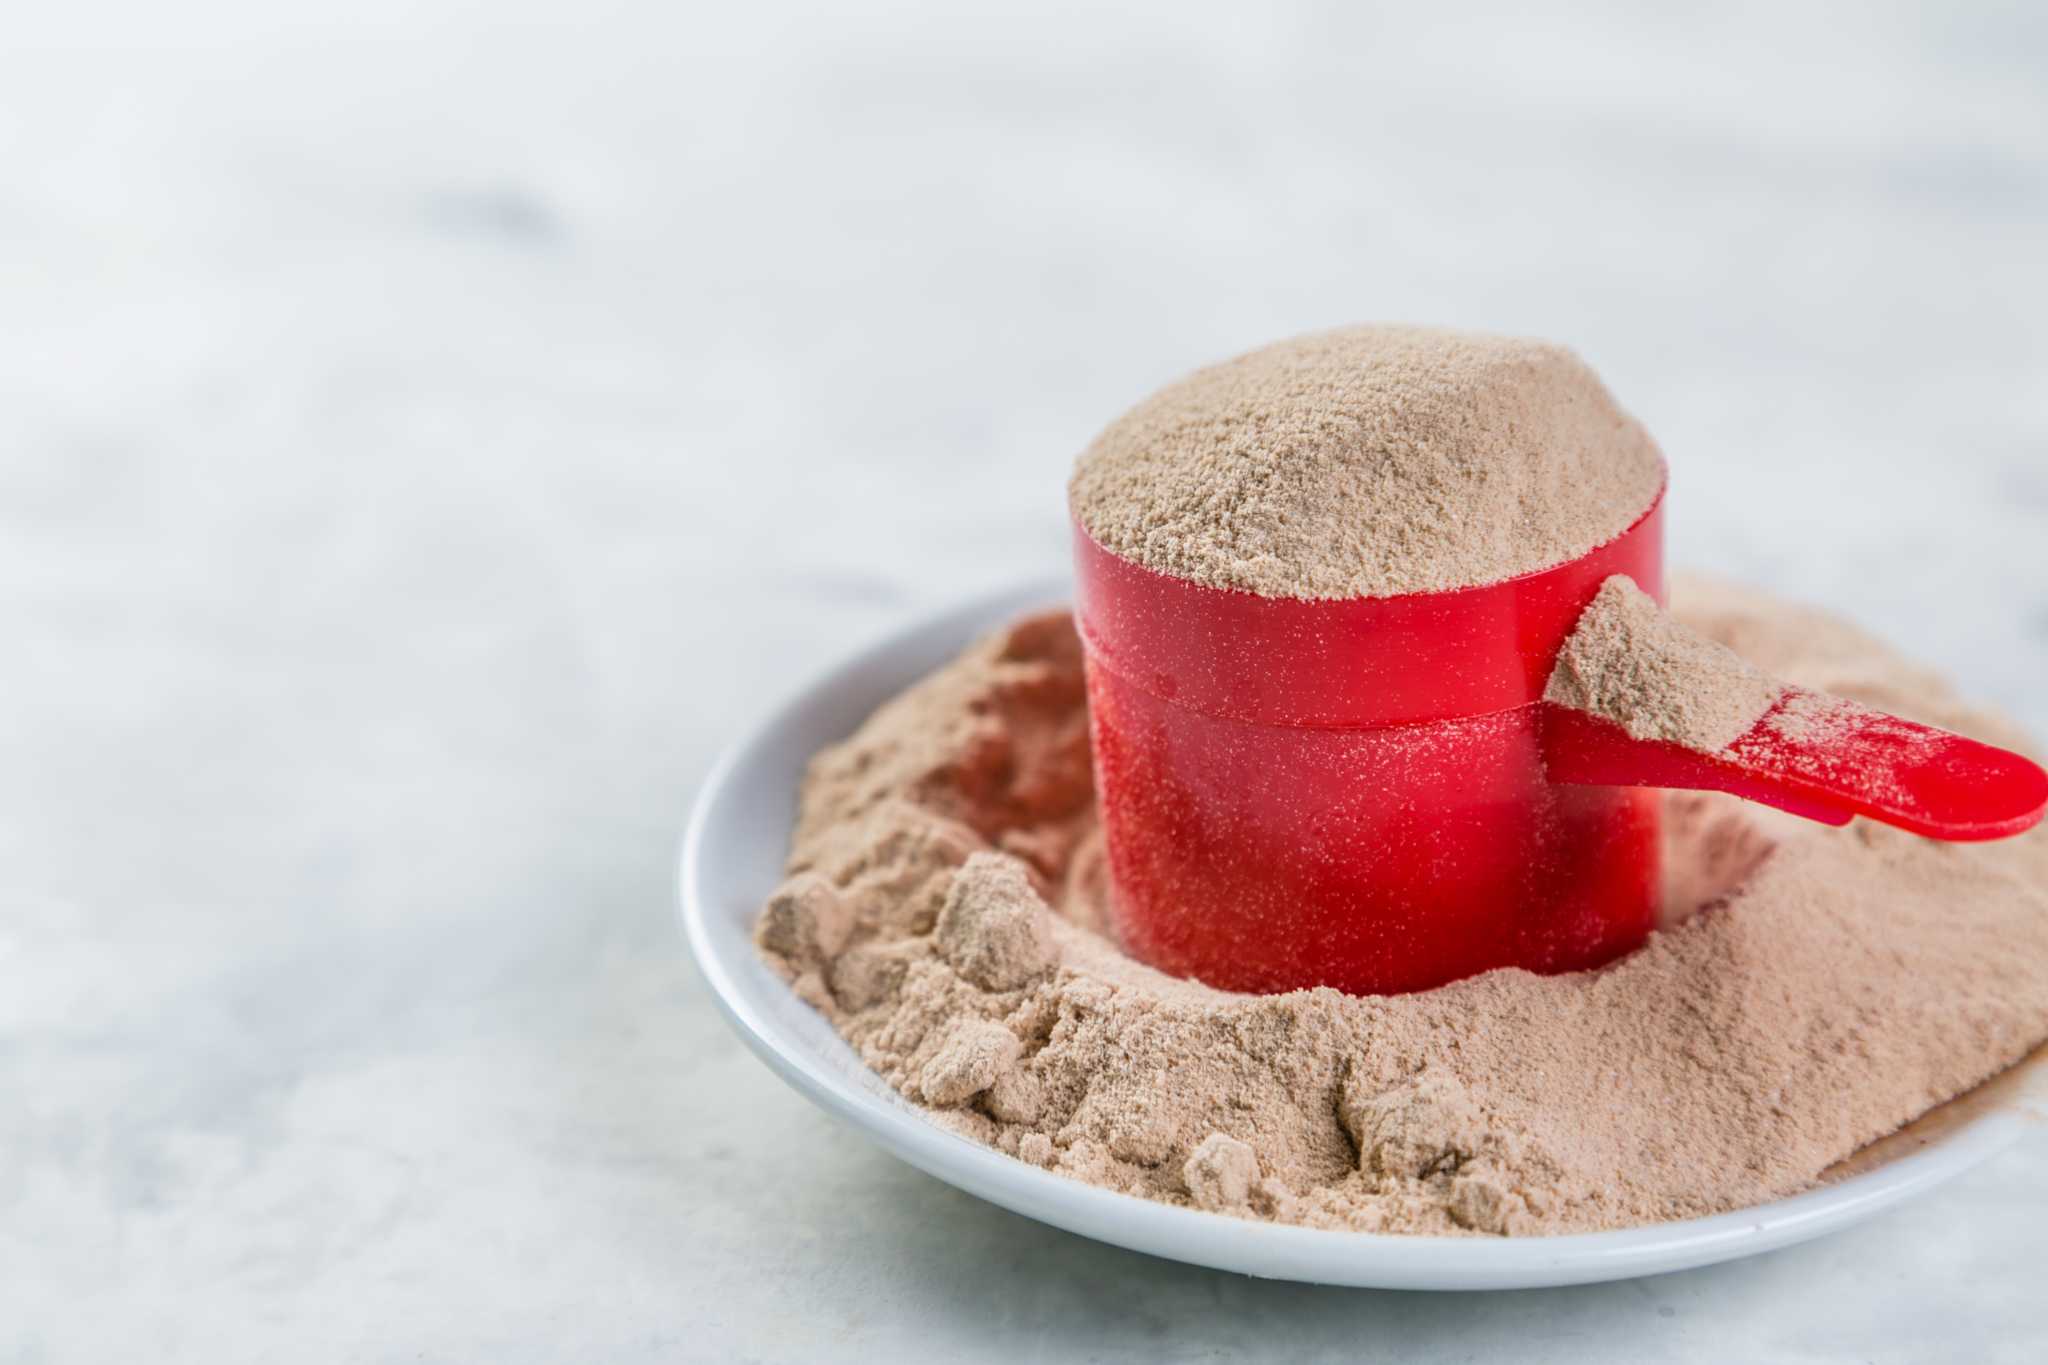 How many tablespoons of protein powder amount to 1 scoop (30 gm